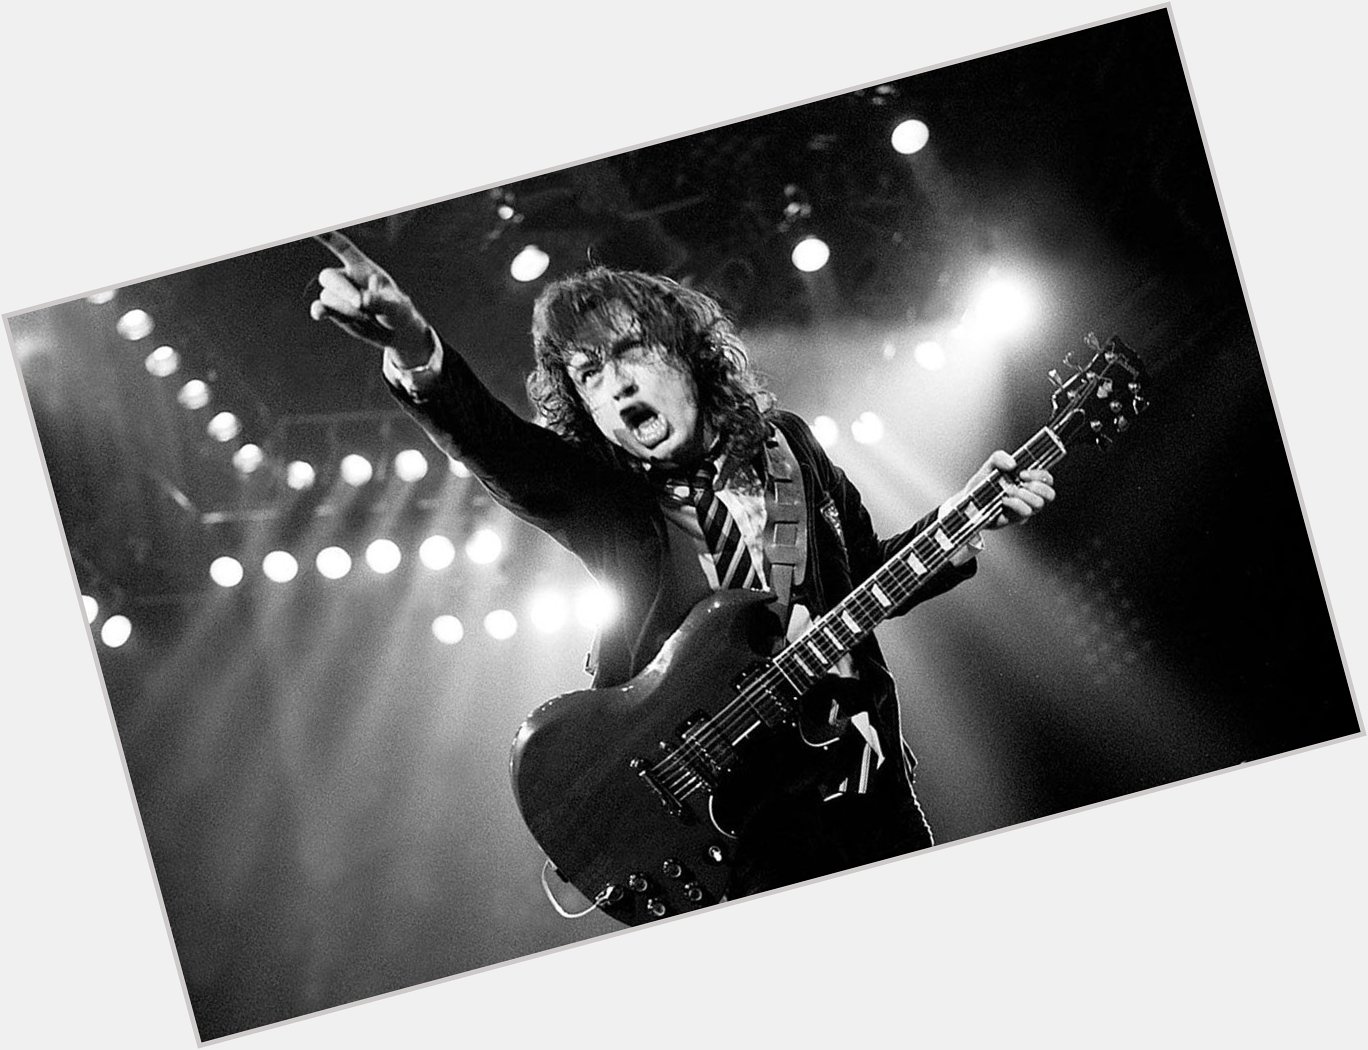 Happy birthday to ACDC guitarist, Angus Young!  (March 31) He is 62 yrs old.  